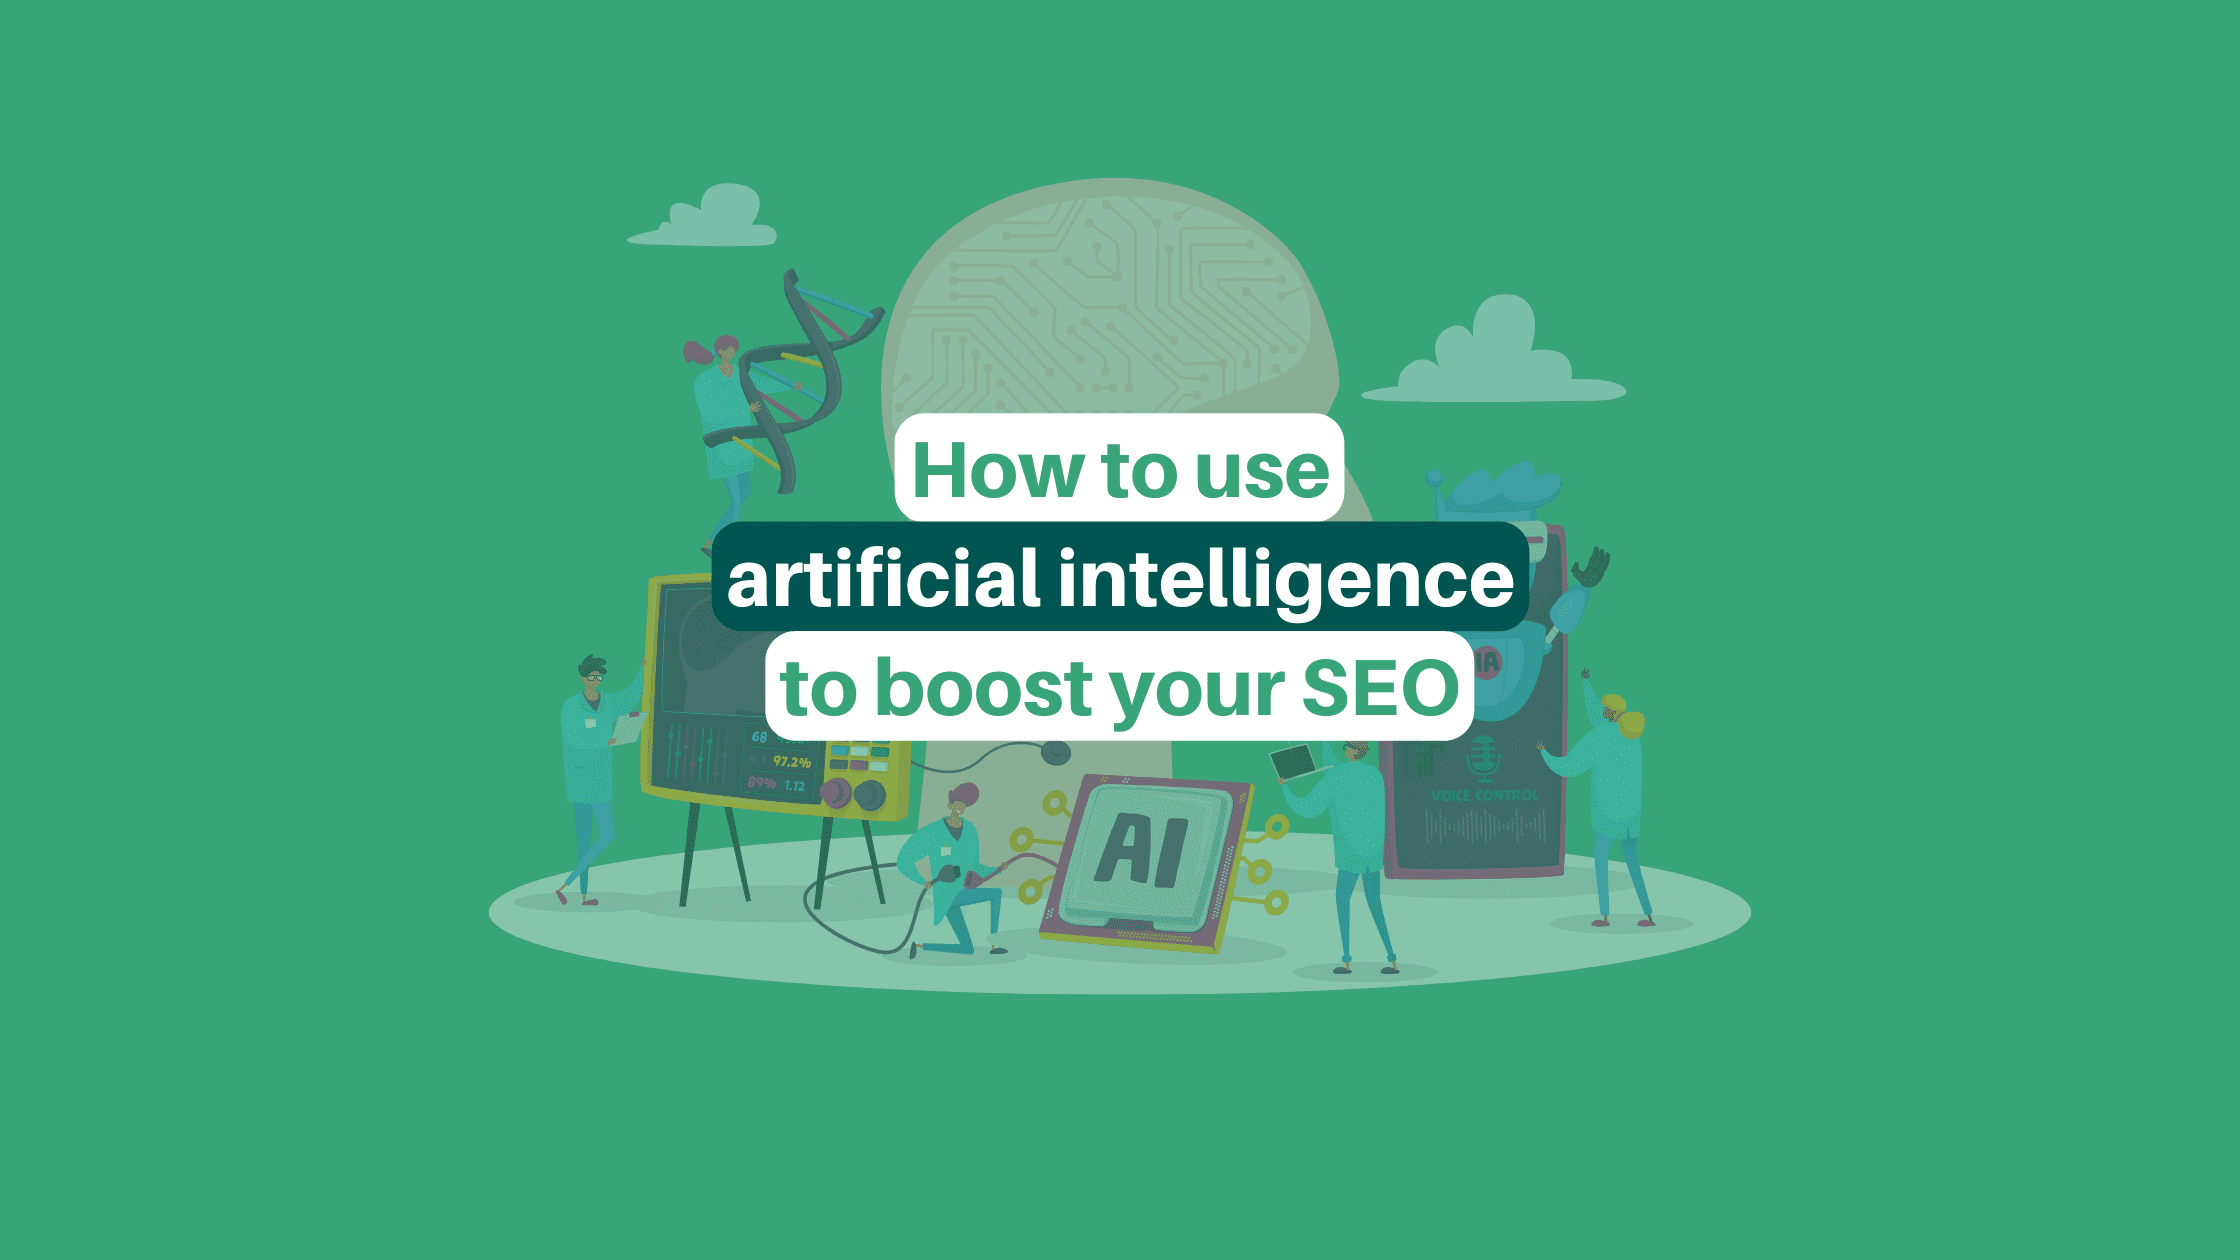 How To Use Artificial Intelligence To Boost Seo Blog Header (1)